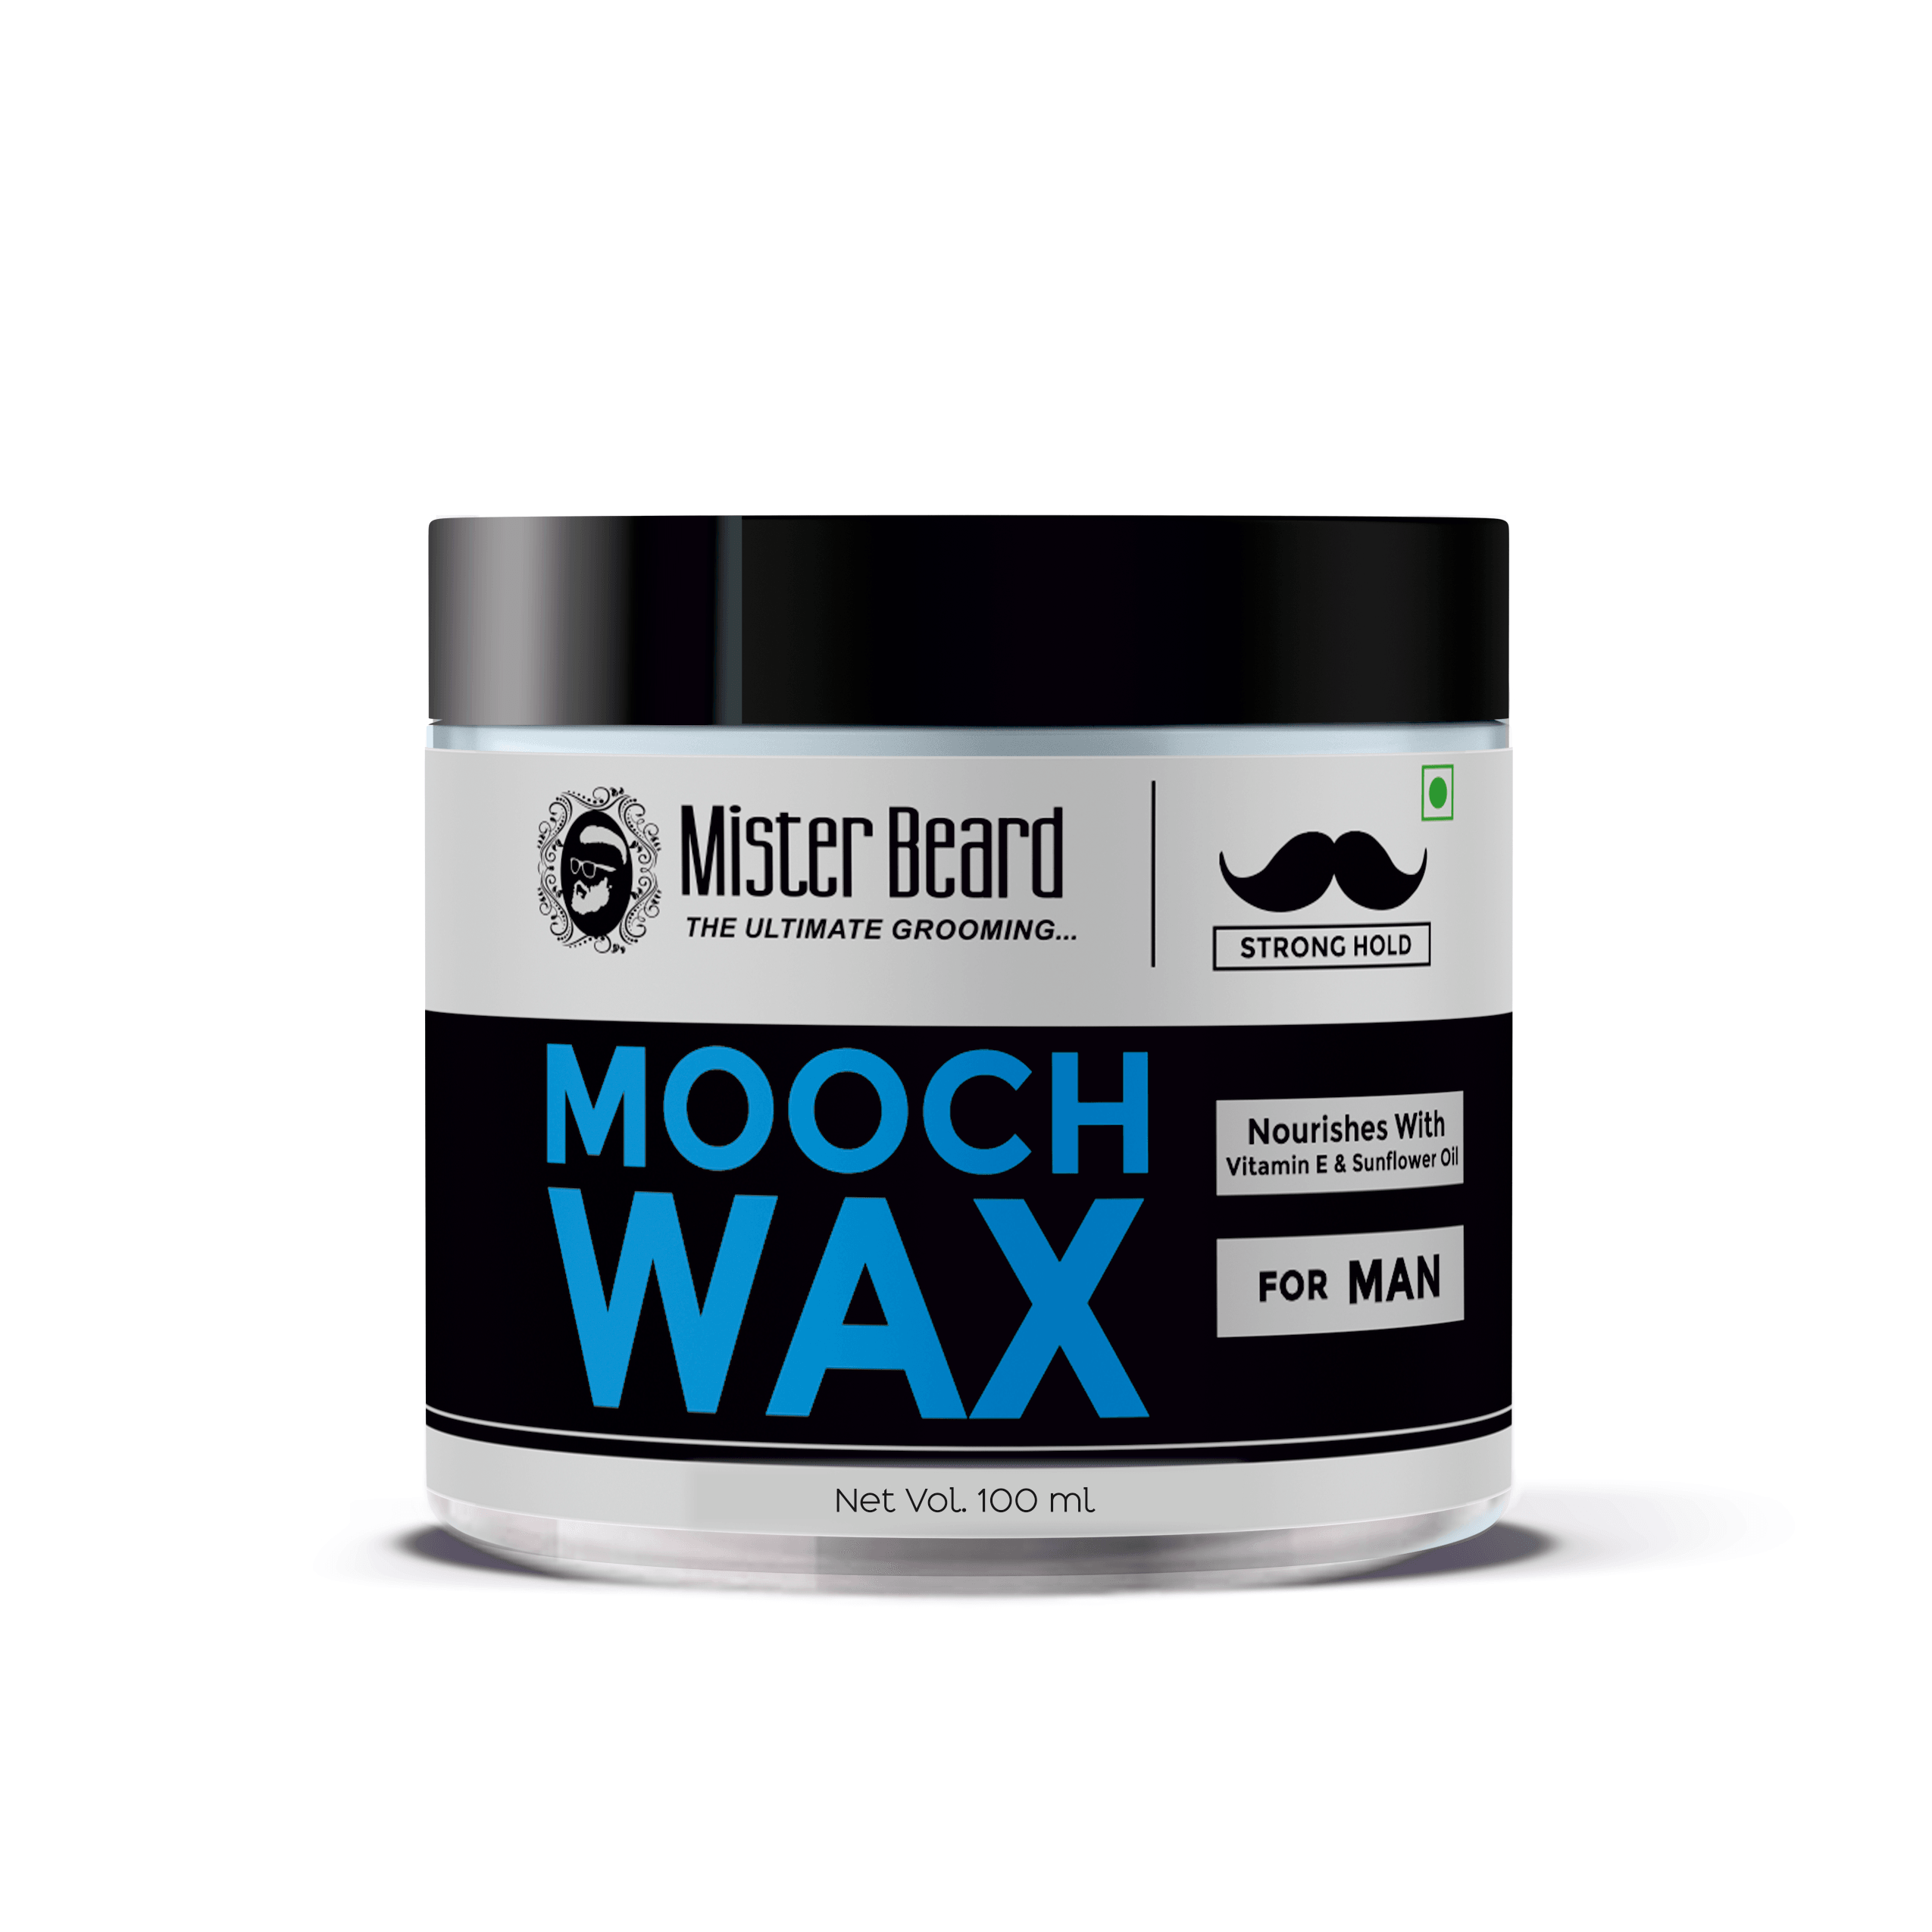 Mister Beard Mooch Wax 100gm, For Glossy Look with Extra Hold - Pink Root